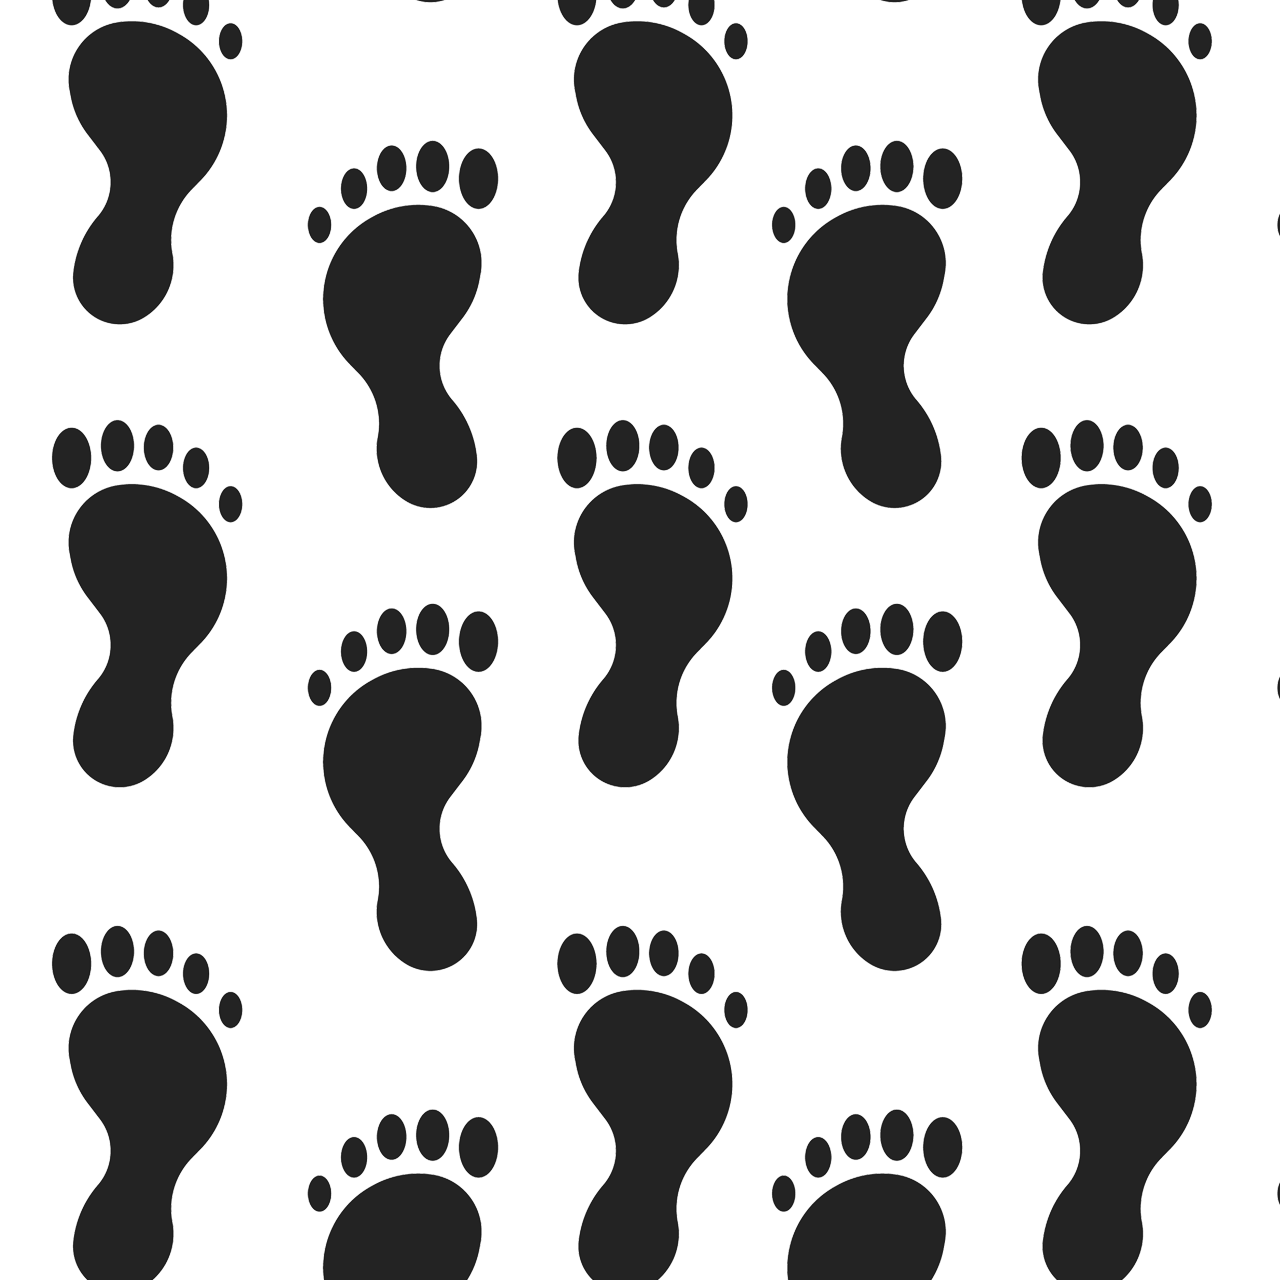 Different black human footprint routes set icontrace walking man with monochrome silhouette shoe barefoot tracks